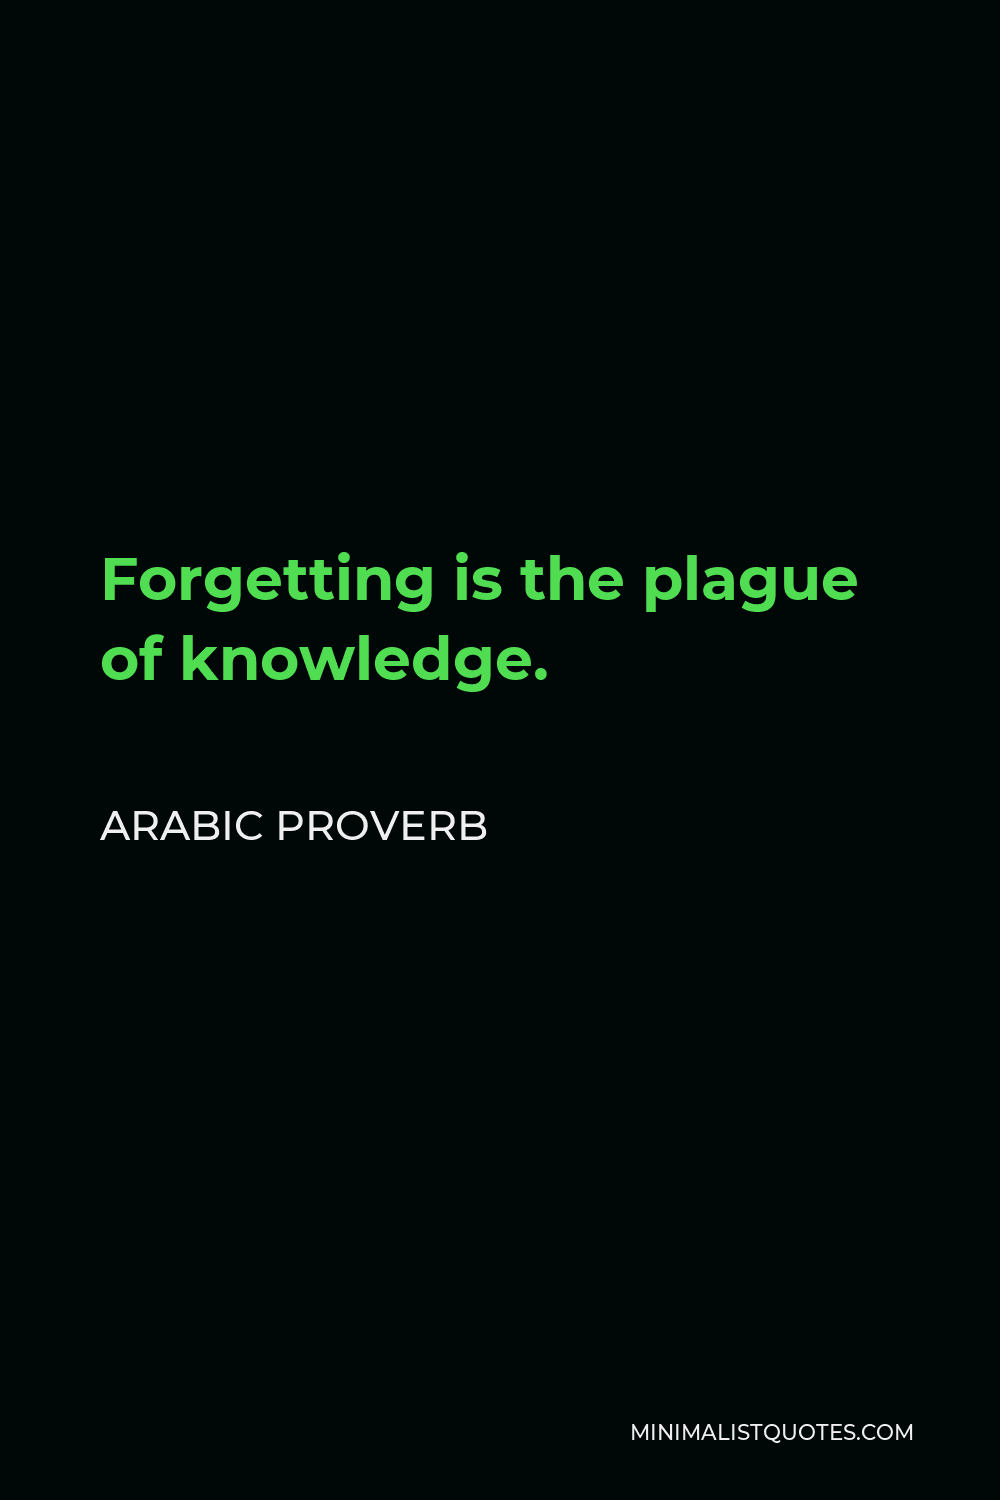 Arabic Proverb Quote - Forgetting is the plague of knowledge.